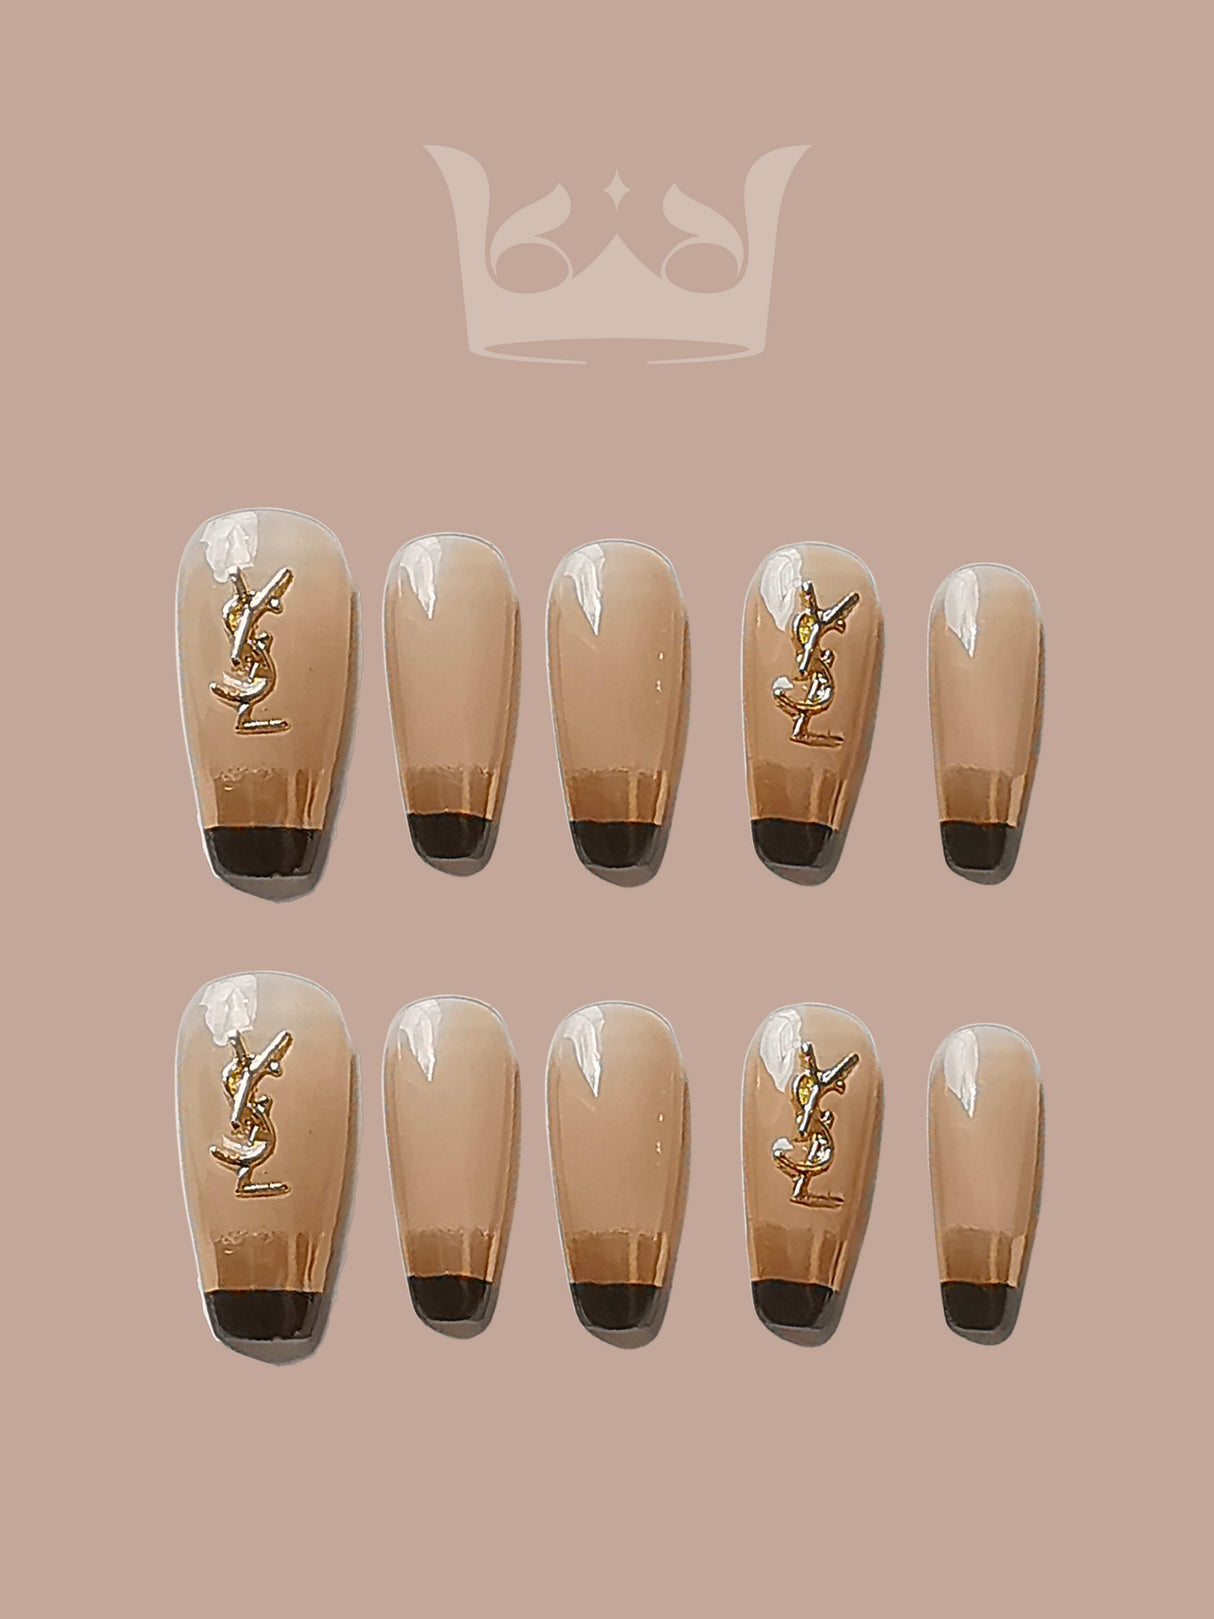 These press-on nails are for special occasions, with a nude base, black tips, and gold accents. They offer a fancy French manicure with a touch of luxury.